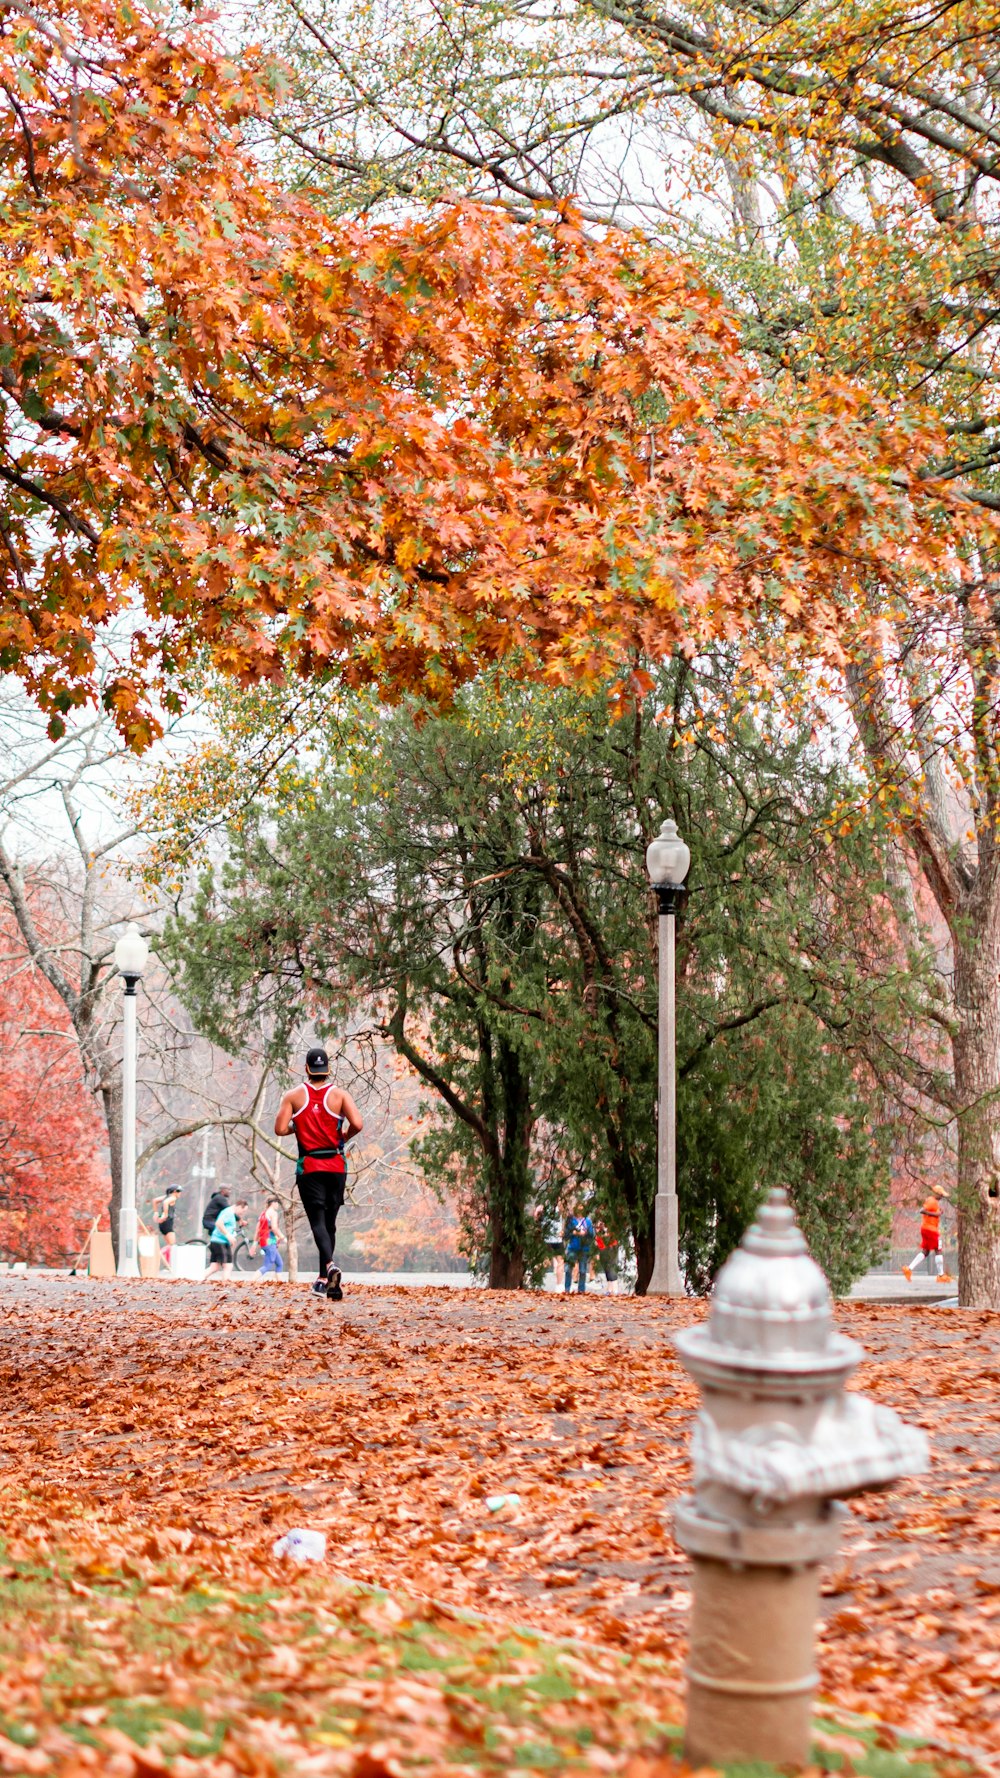 a person running in a park with leaves on the ground